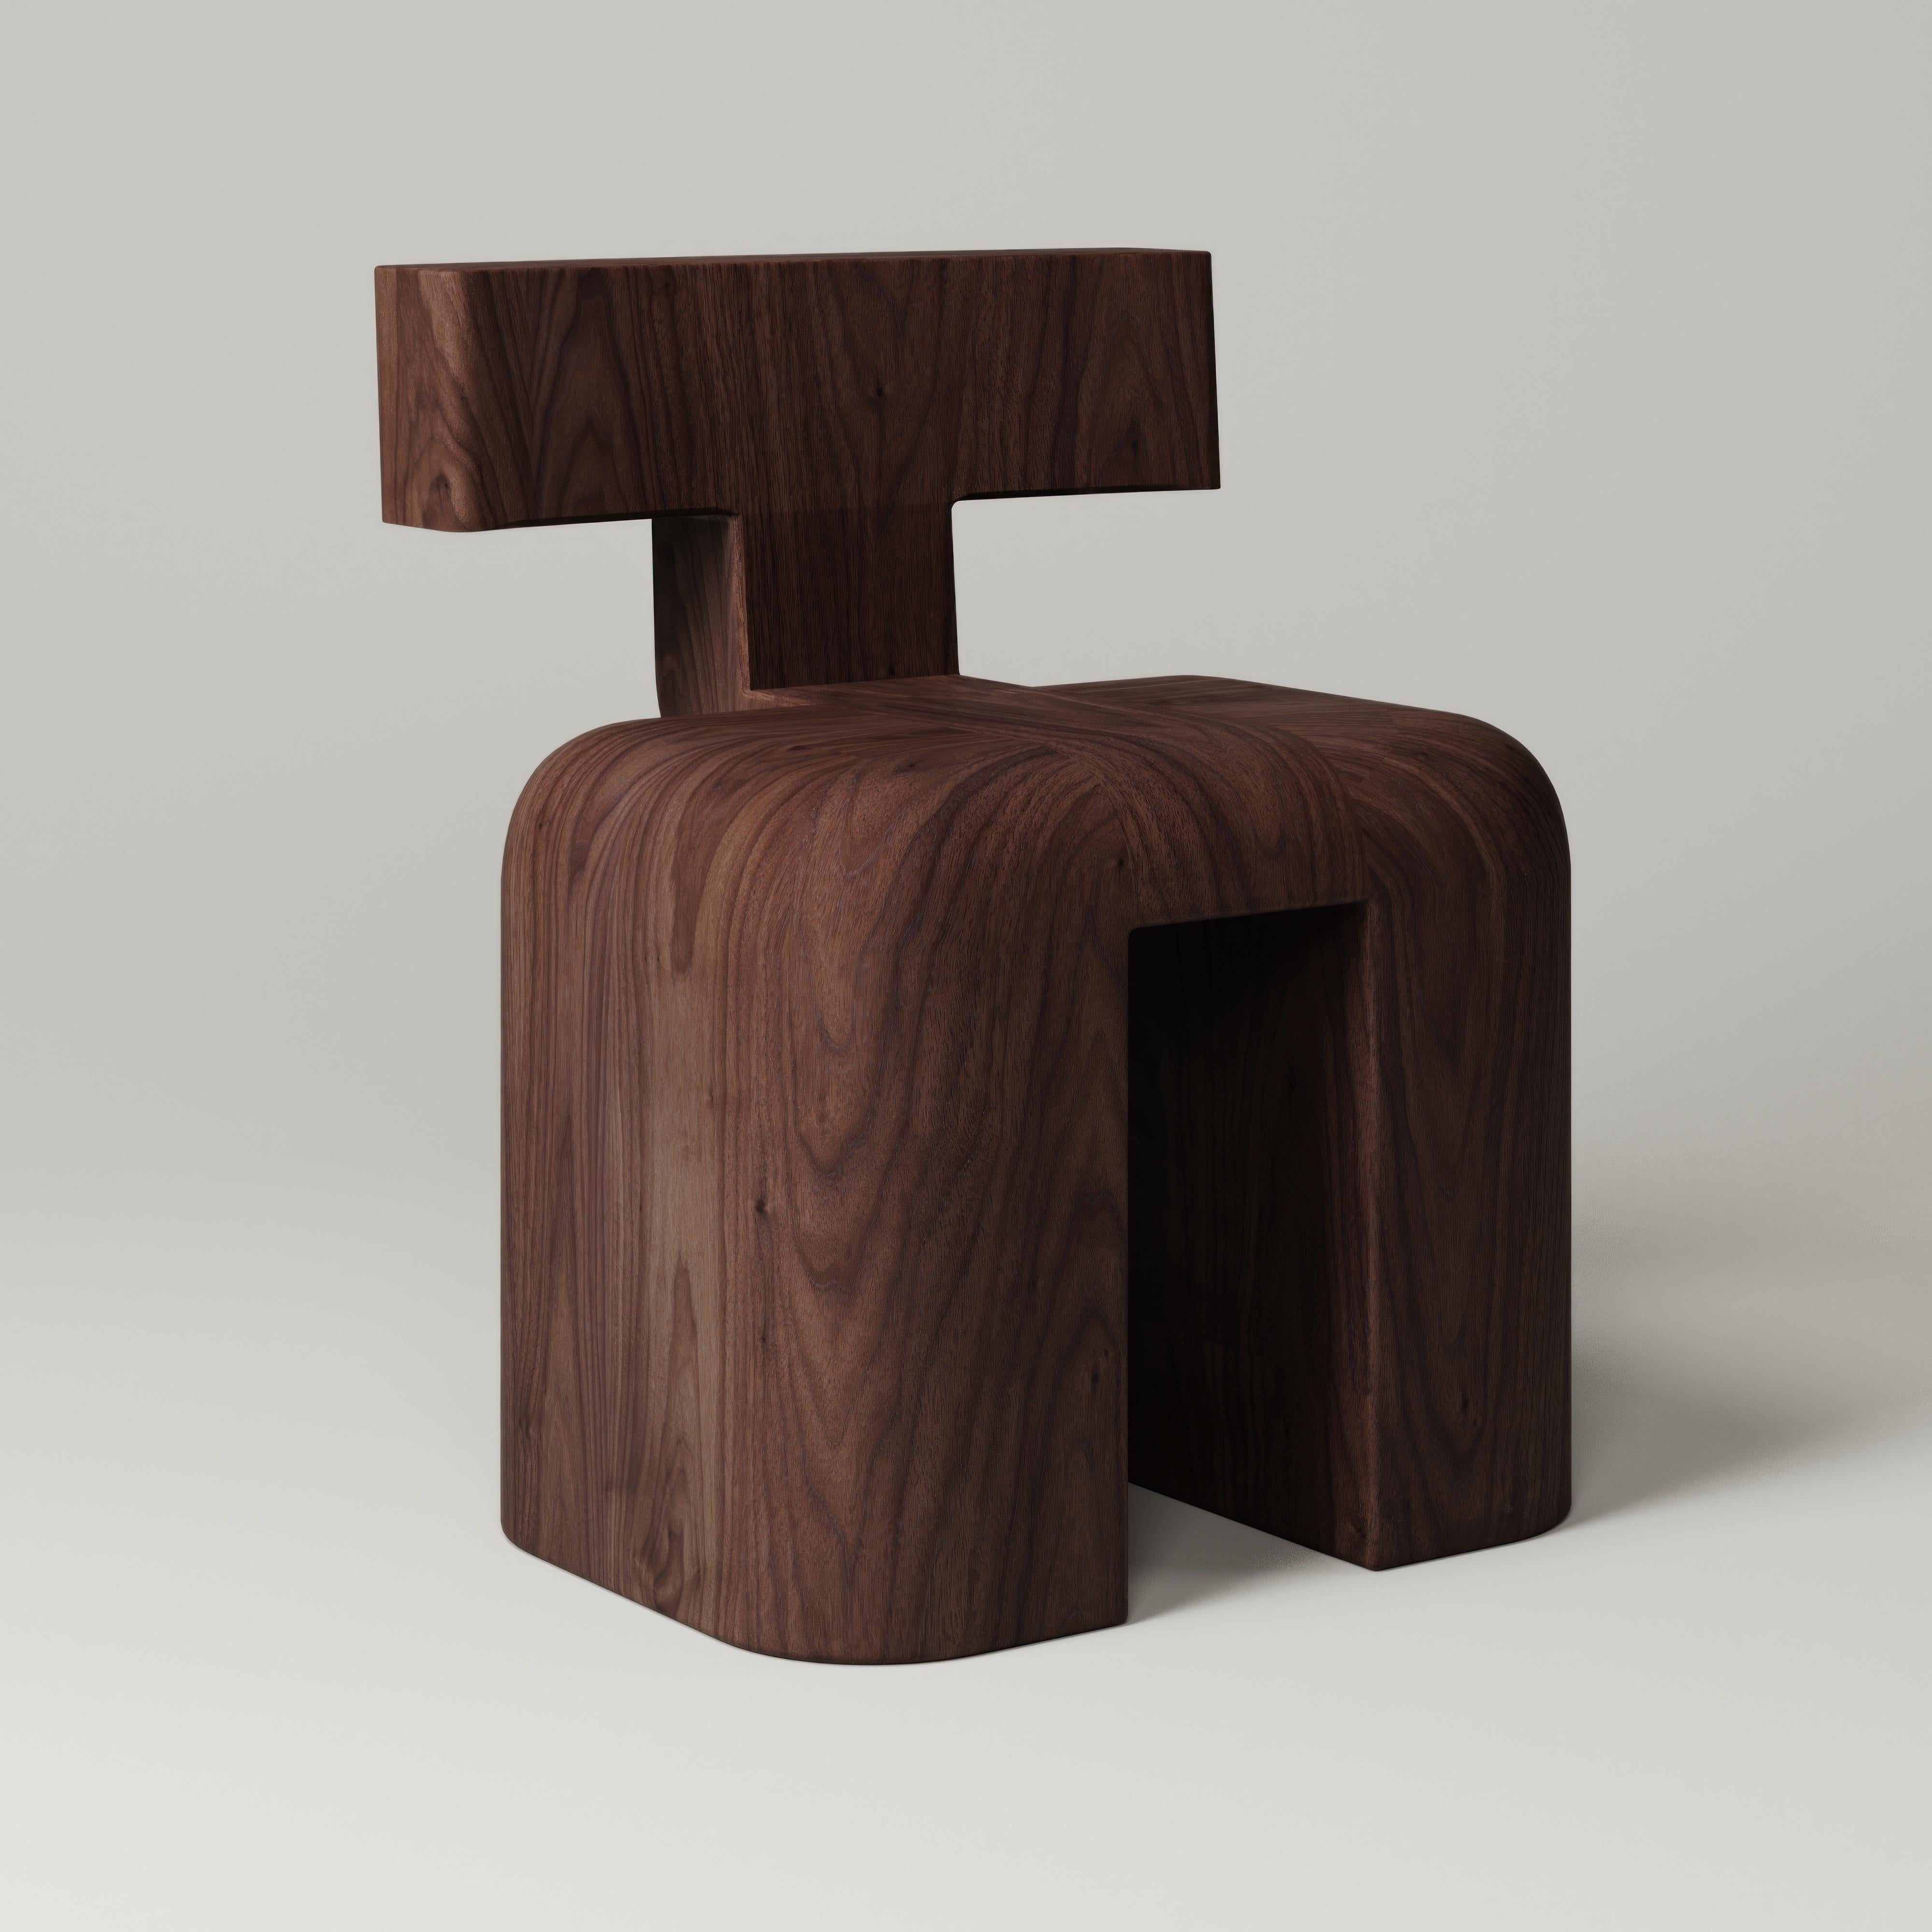 M_013 Walnut Dining Chair by Monolith Studio
Signed and Numbered.
Dimensions: D 40 x W 56 x H 71 cm. 
Materials: Walnut.

Available in travertine, lava rock, onyx, walnut and white oak (on request). Please contact us. 

Monolith, founded in 2022 by